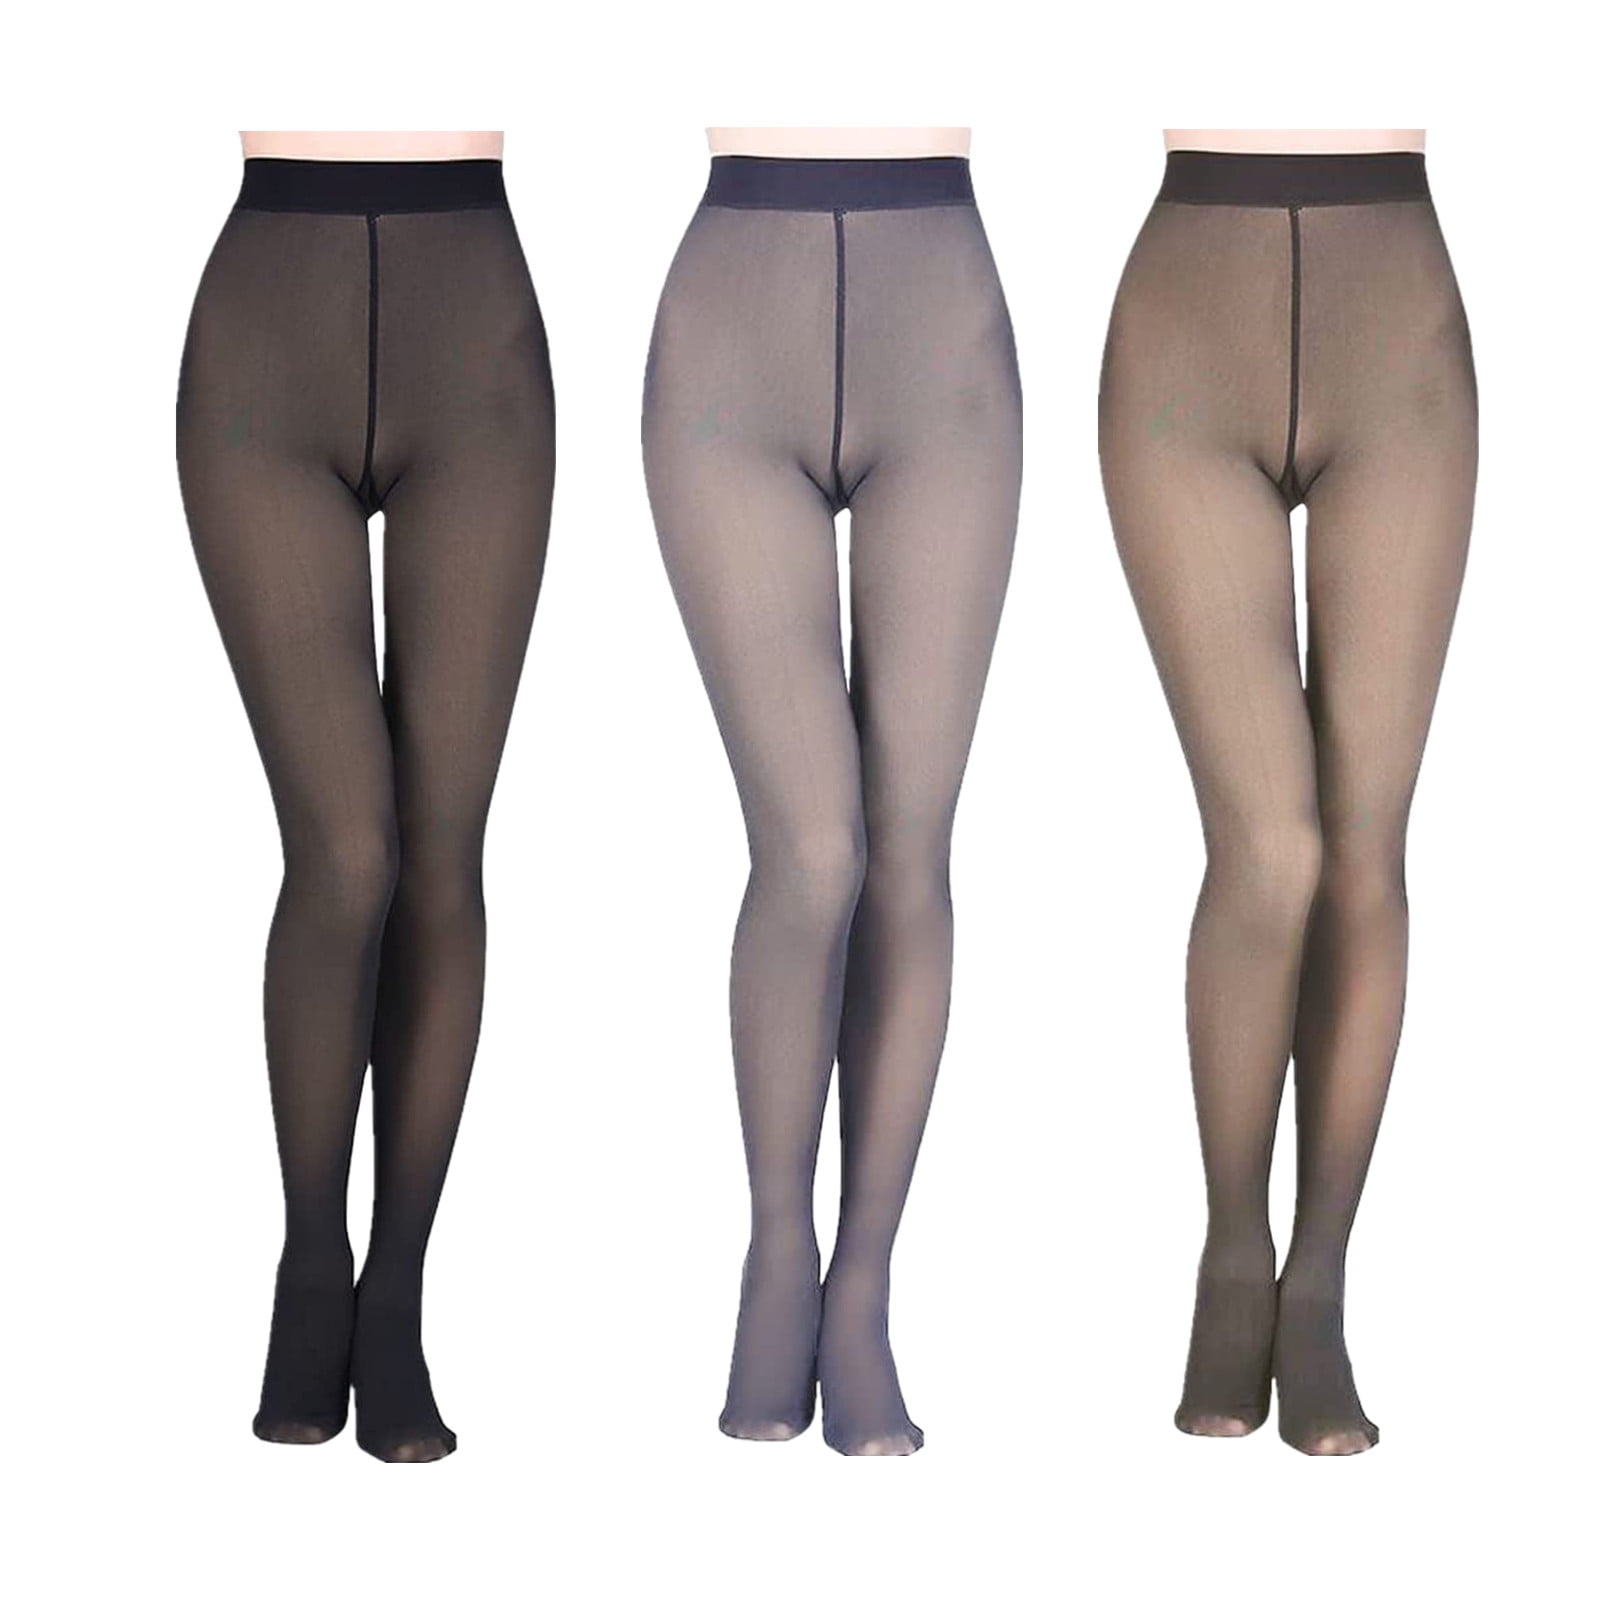  Winter Fleece Lined Tights For Women, High Waisted Warm Fake  Translucent Compression Tights Fuzzy Thermal Thick Elastic Leggings